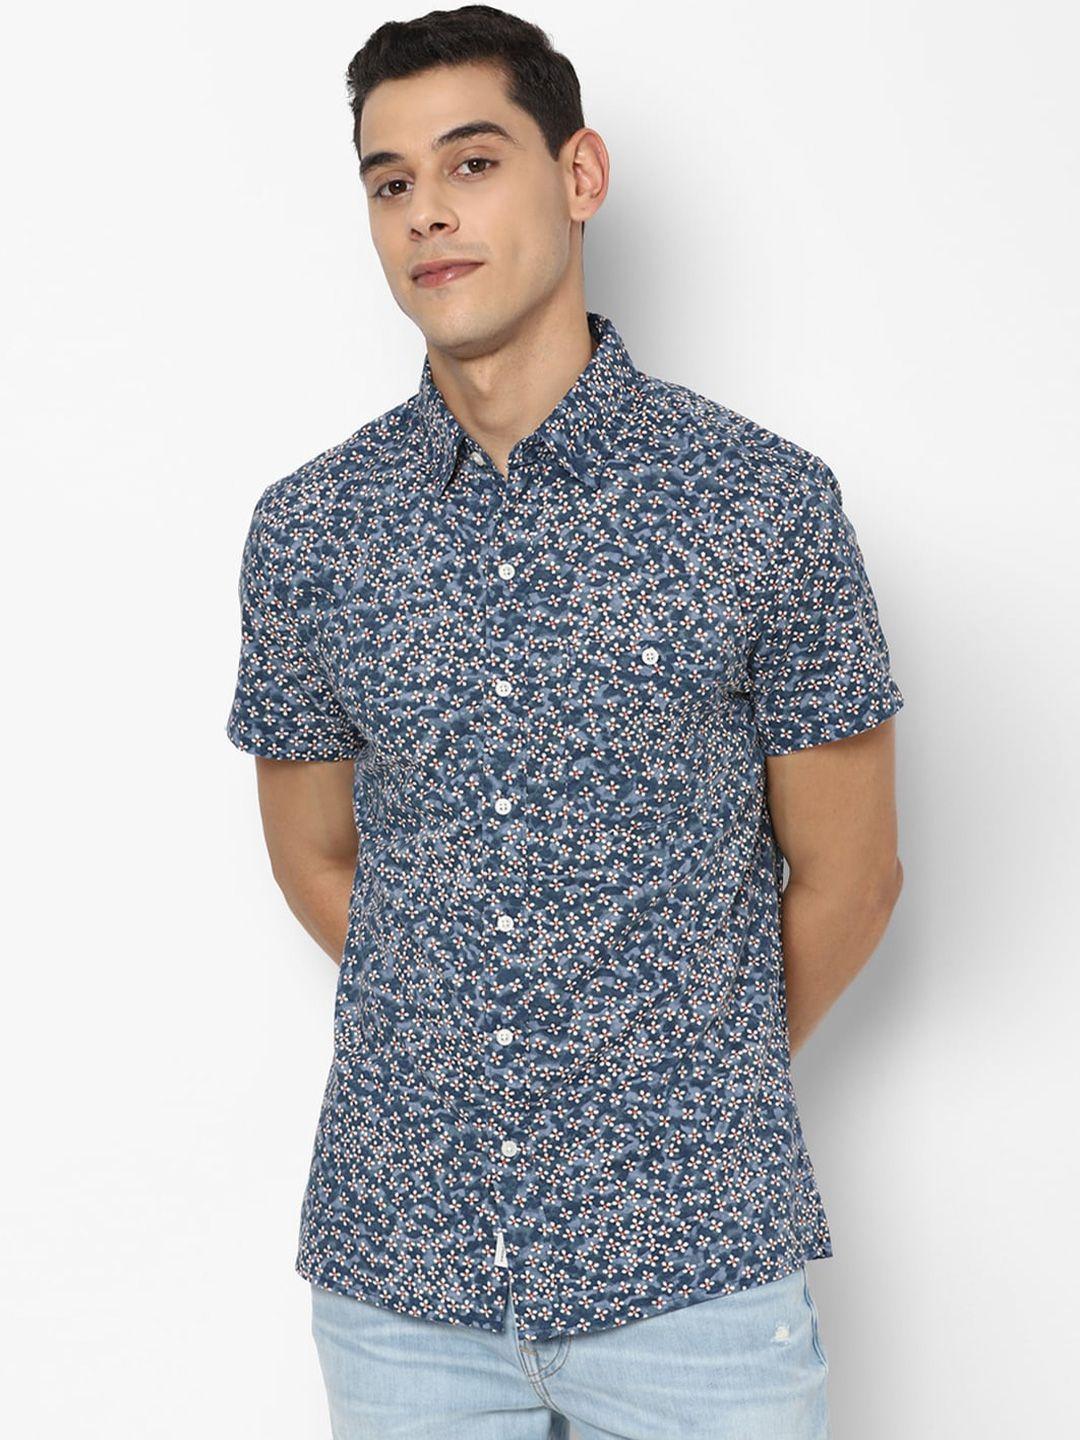 american eagle outfitters men blue floral printed casual shirt